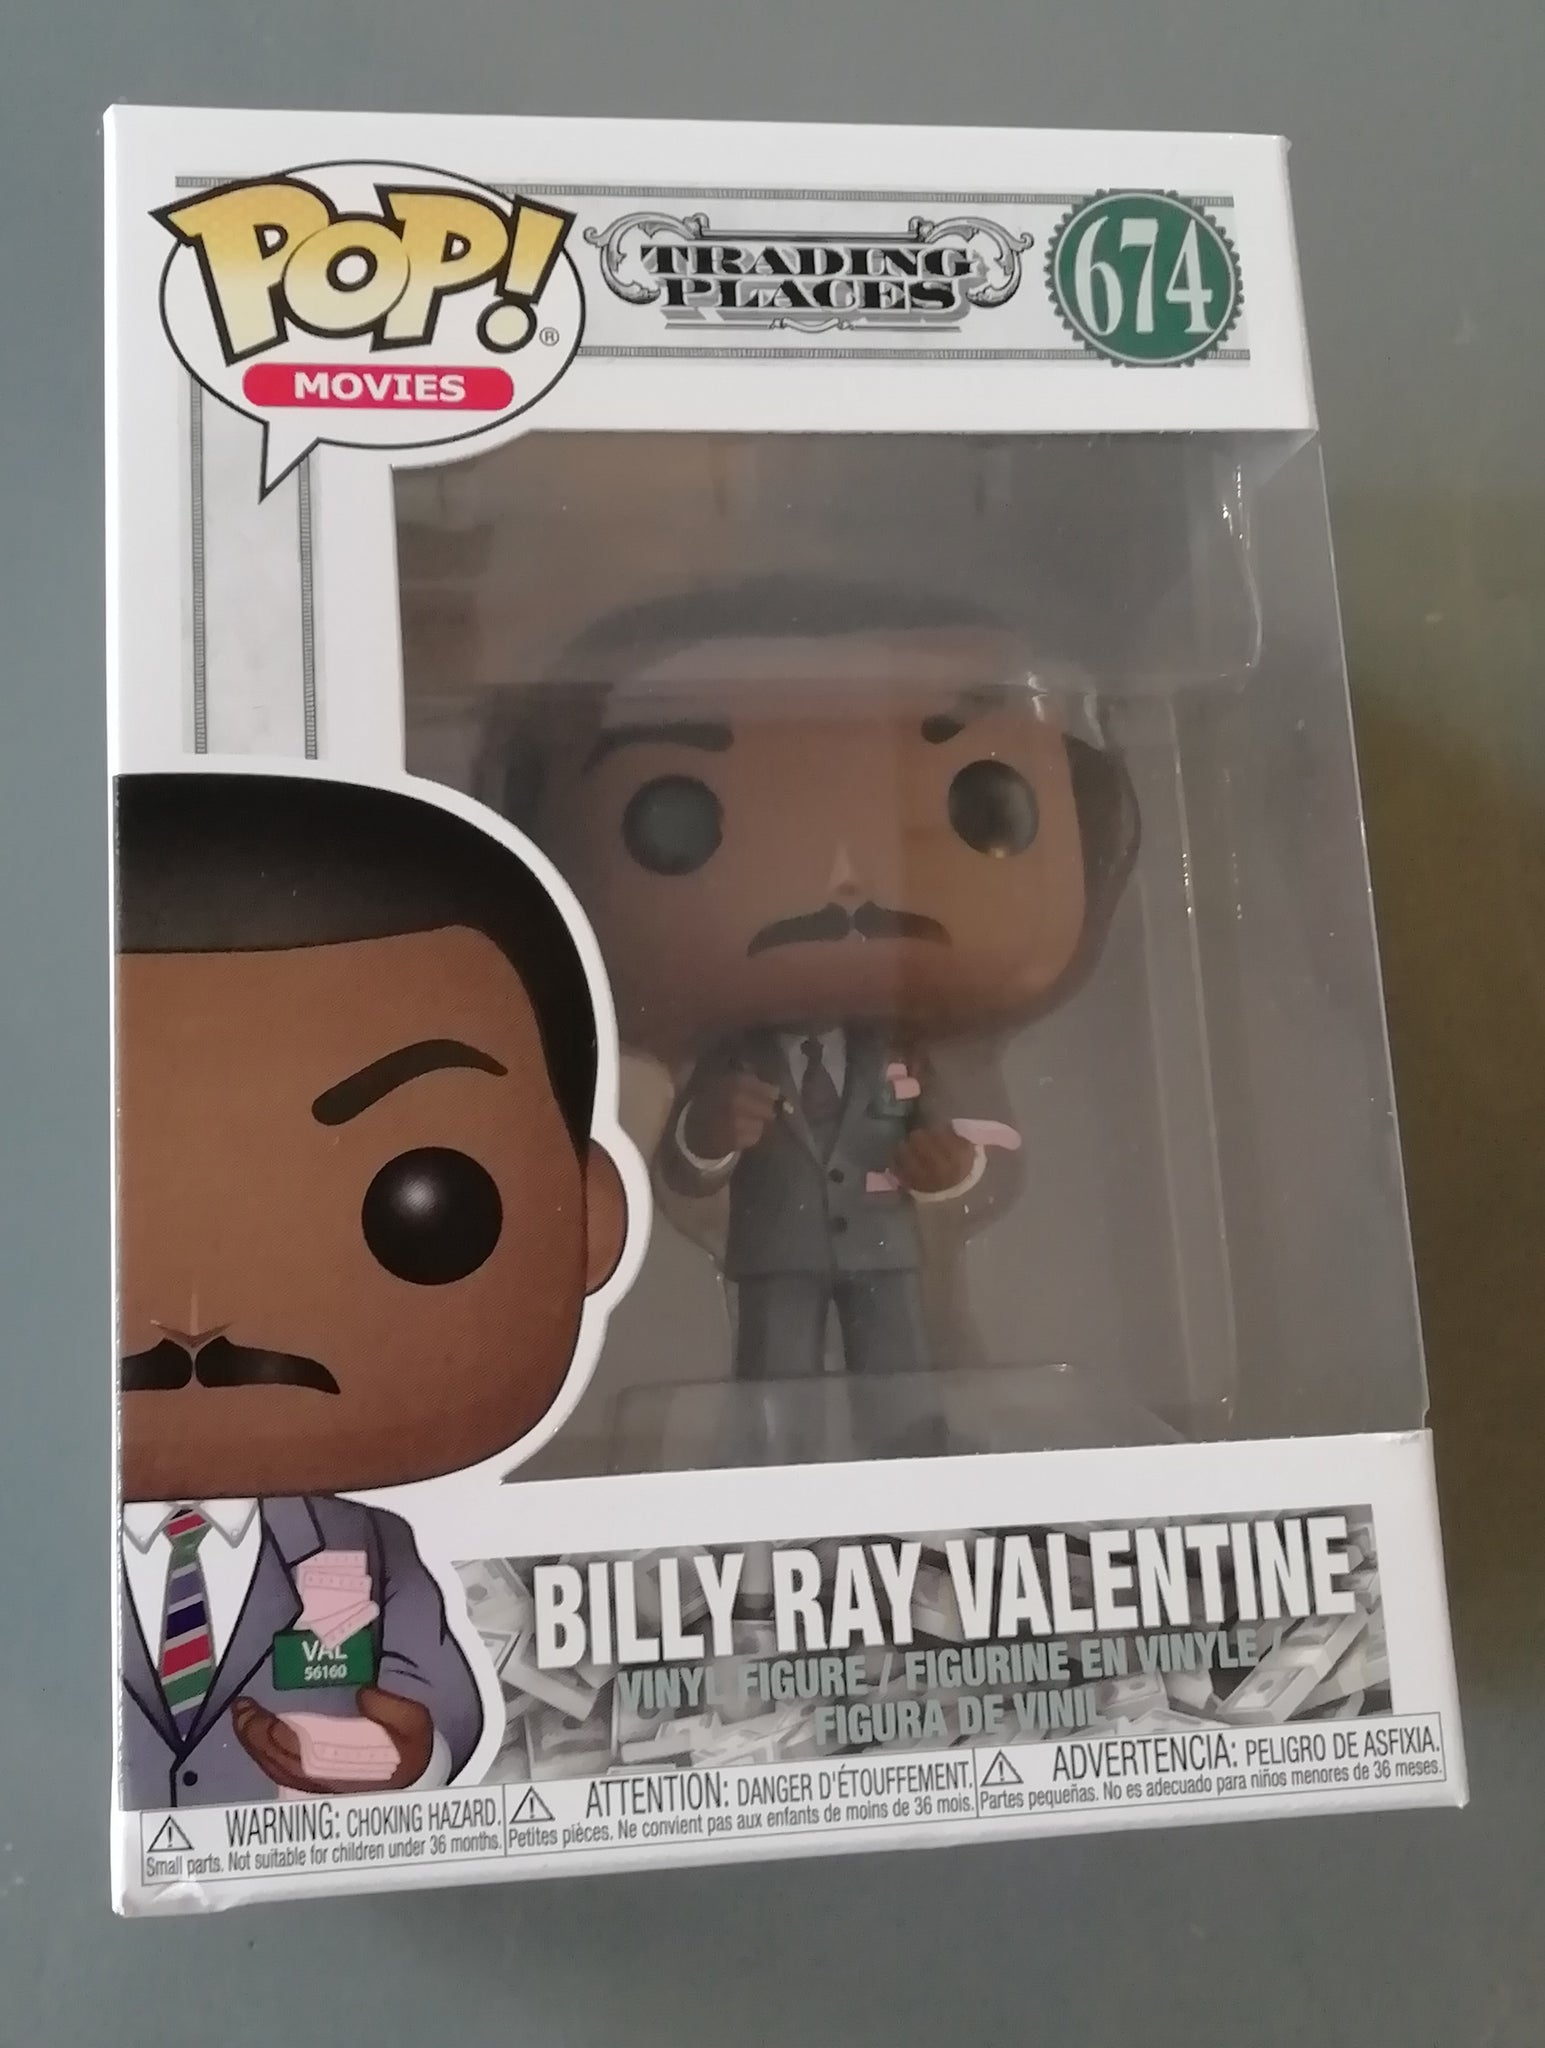 Funko Pop! Trading Places Billy Ray Valentine #674